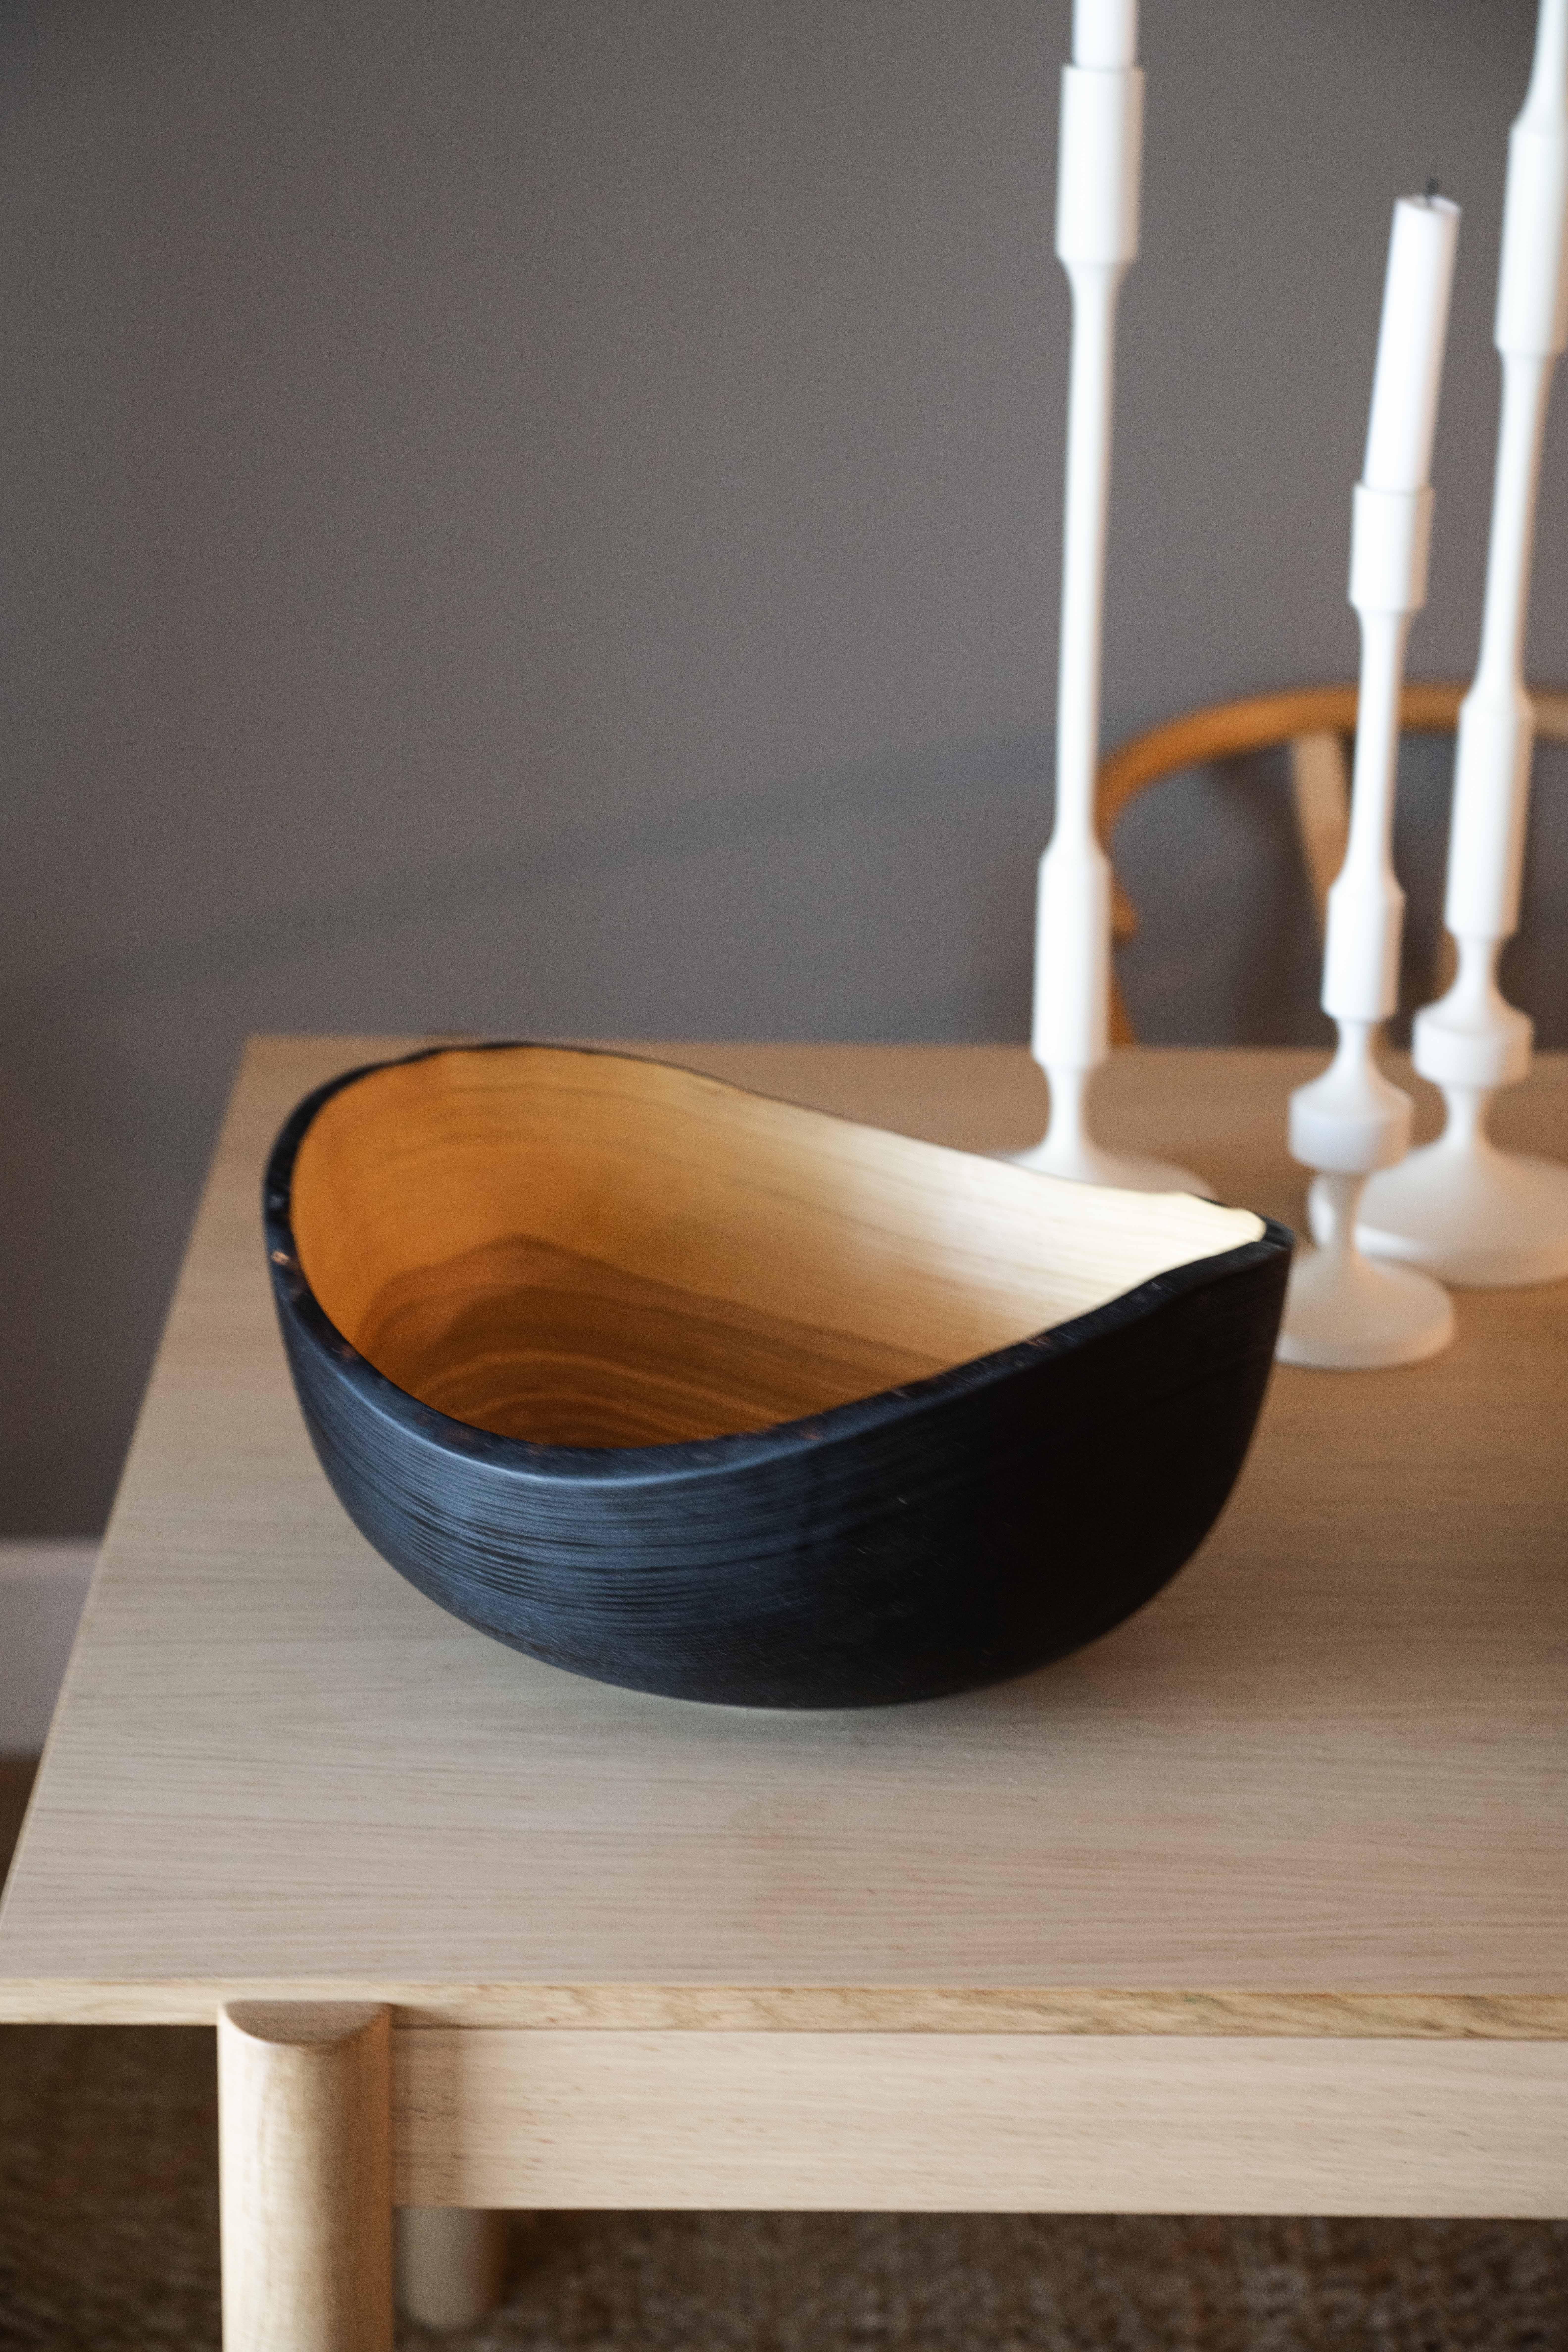 This large wood bowl will become a centerpiece on your table and a perfect vessel for all your fruits or vegetables in the kitchen. Hand-carved from one solid piece of ash wood, the shape continues the wooden rings and puts the age and the beauty of